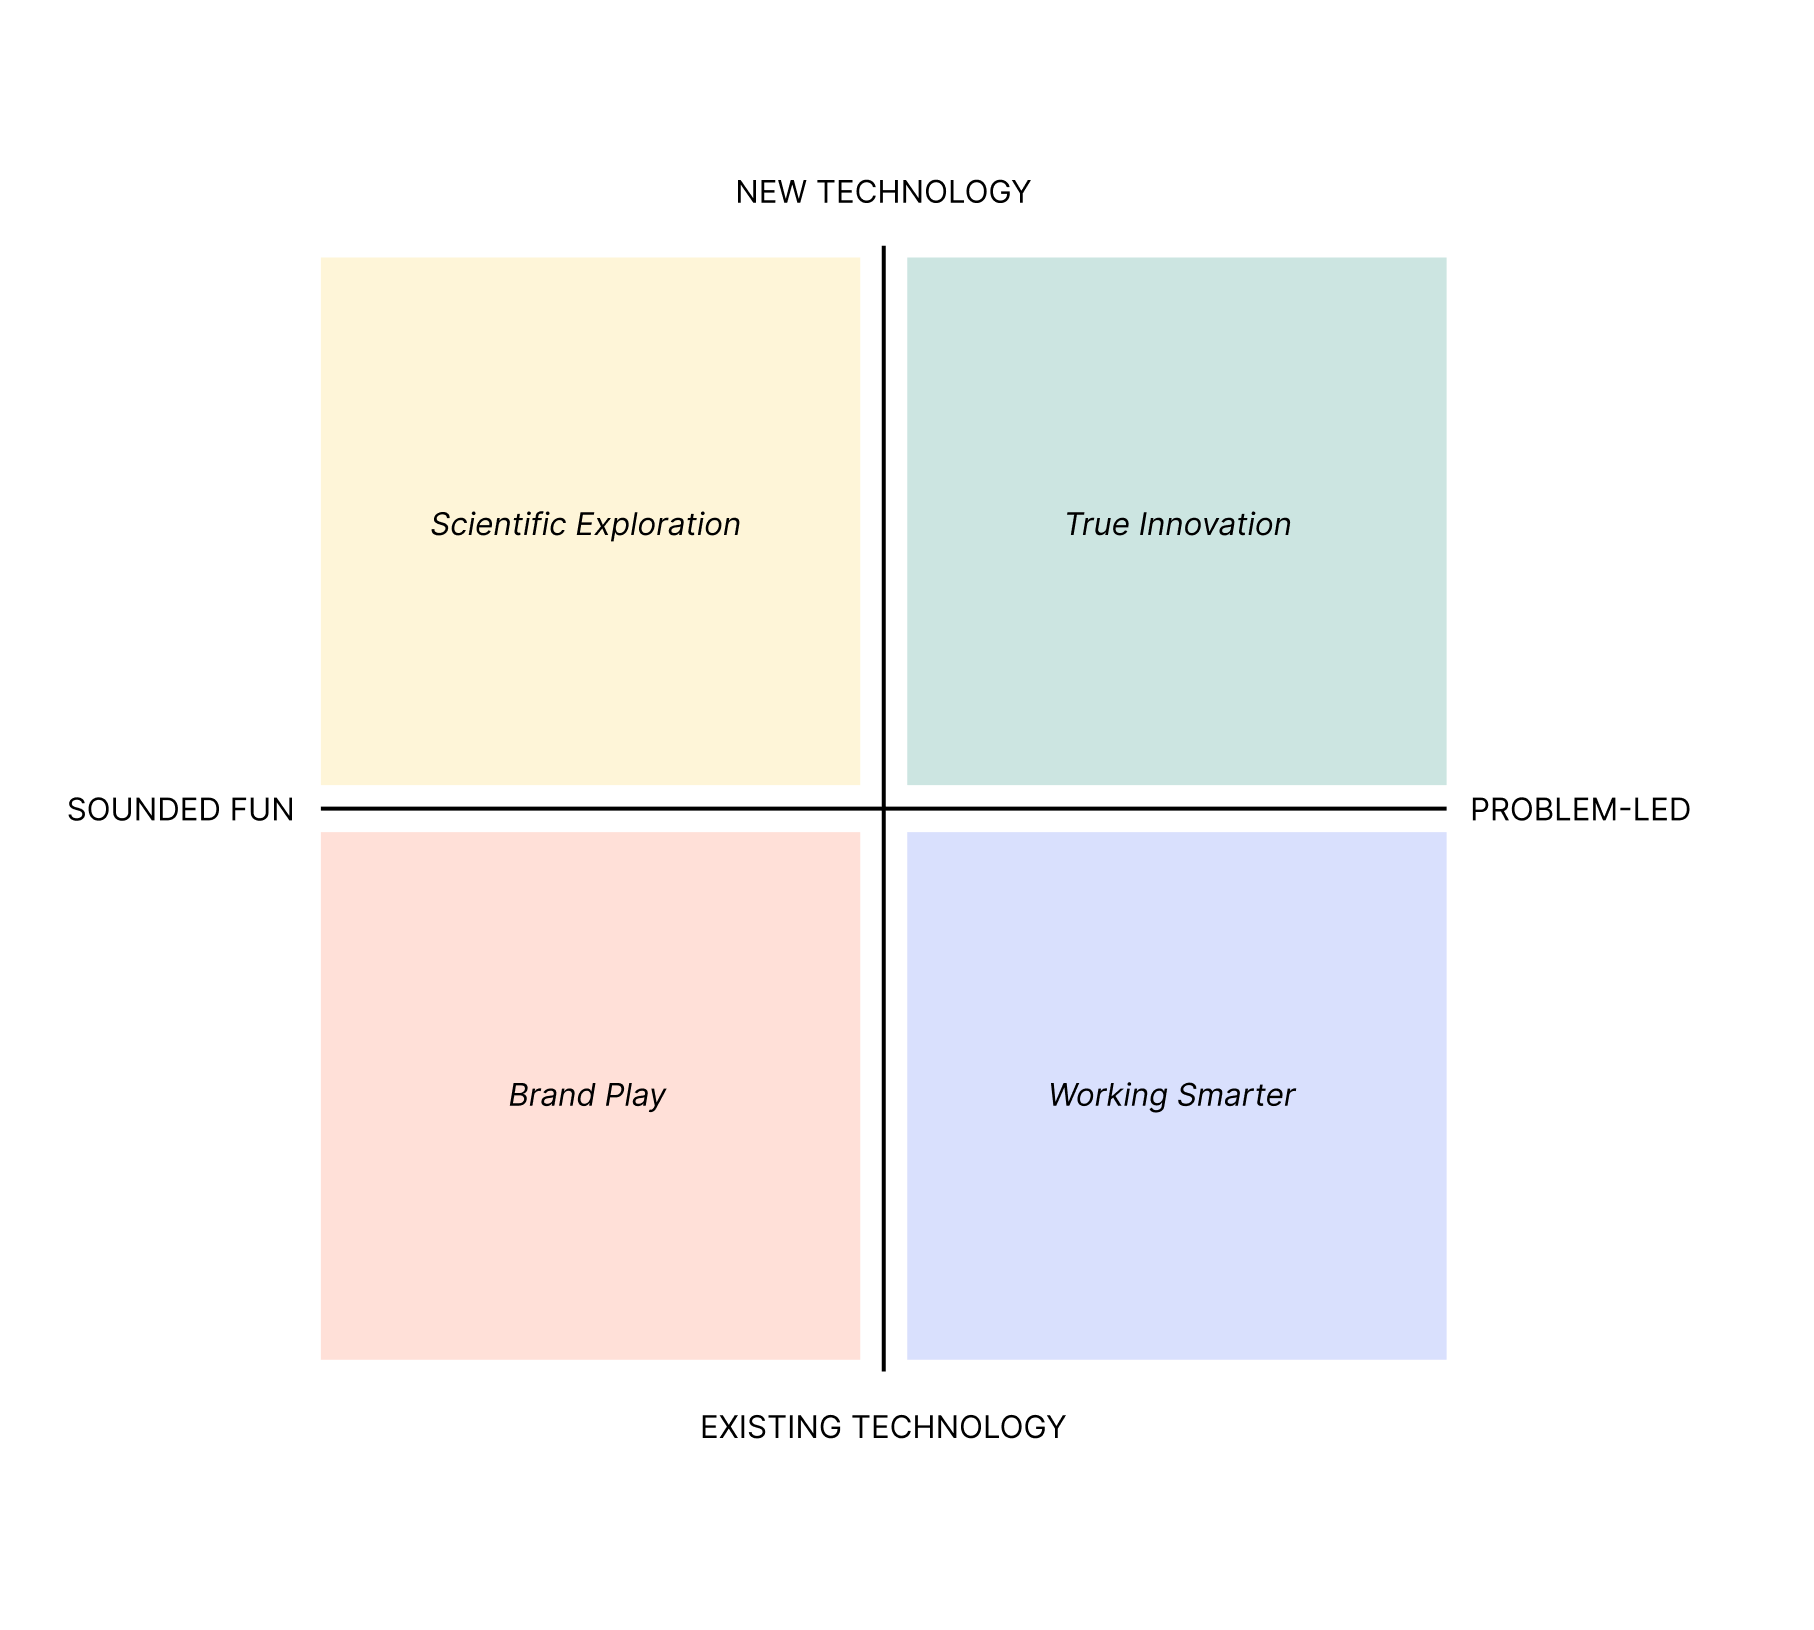 Graph with four quadrants that explains problem-led products versus those that sounded fun, as well as new technology products versus existing technology.